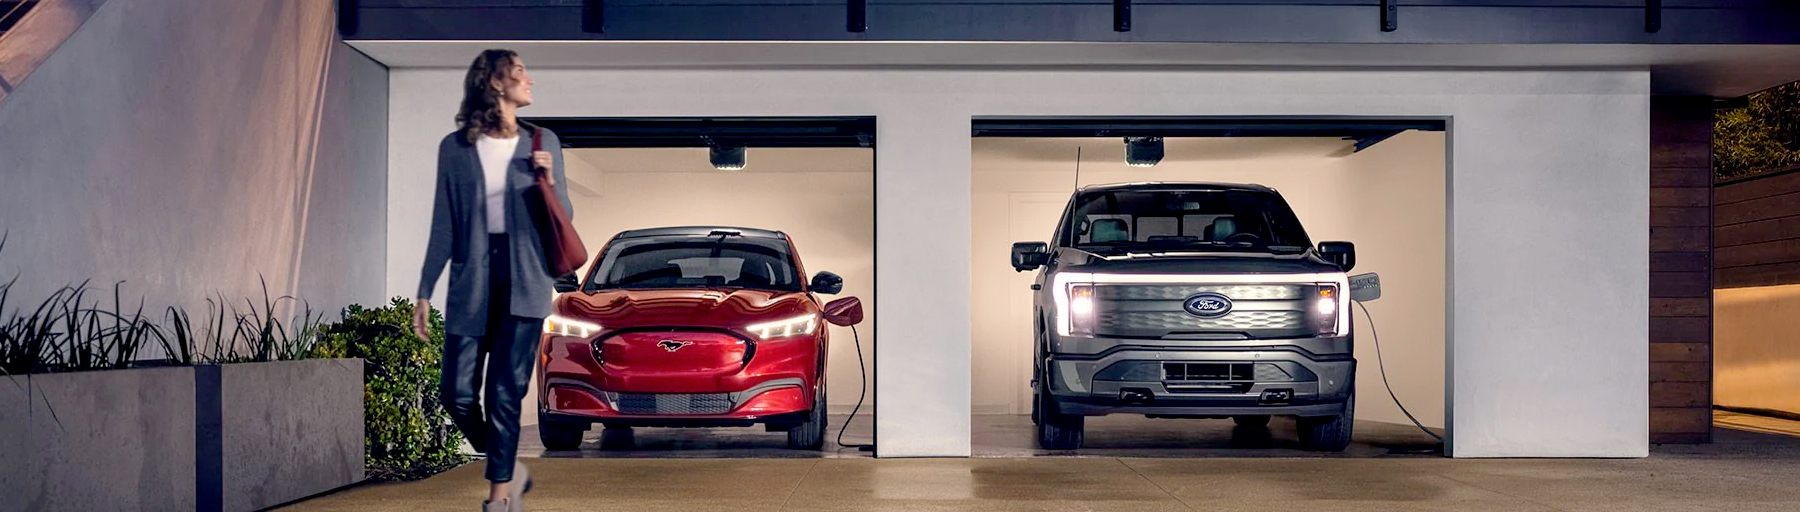 A 2023 Ford Mustang Mach-E and a Ford F-150 Lightning are being charged in a garage at night near two people